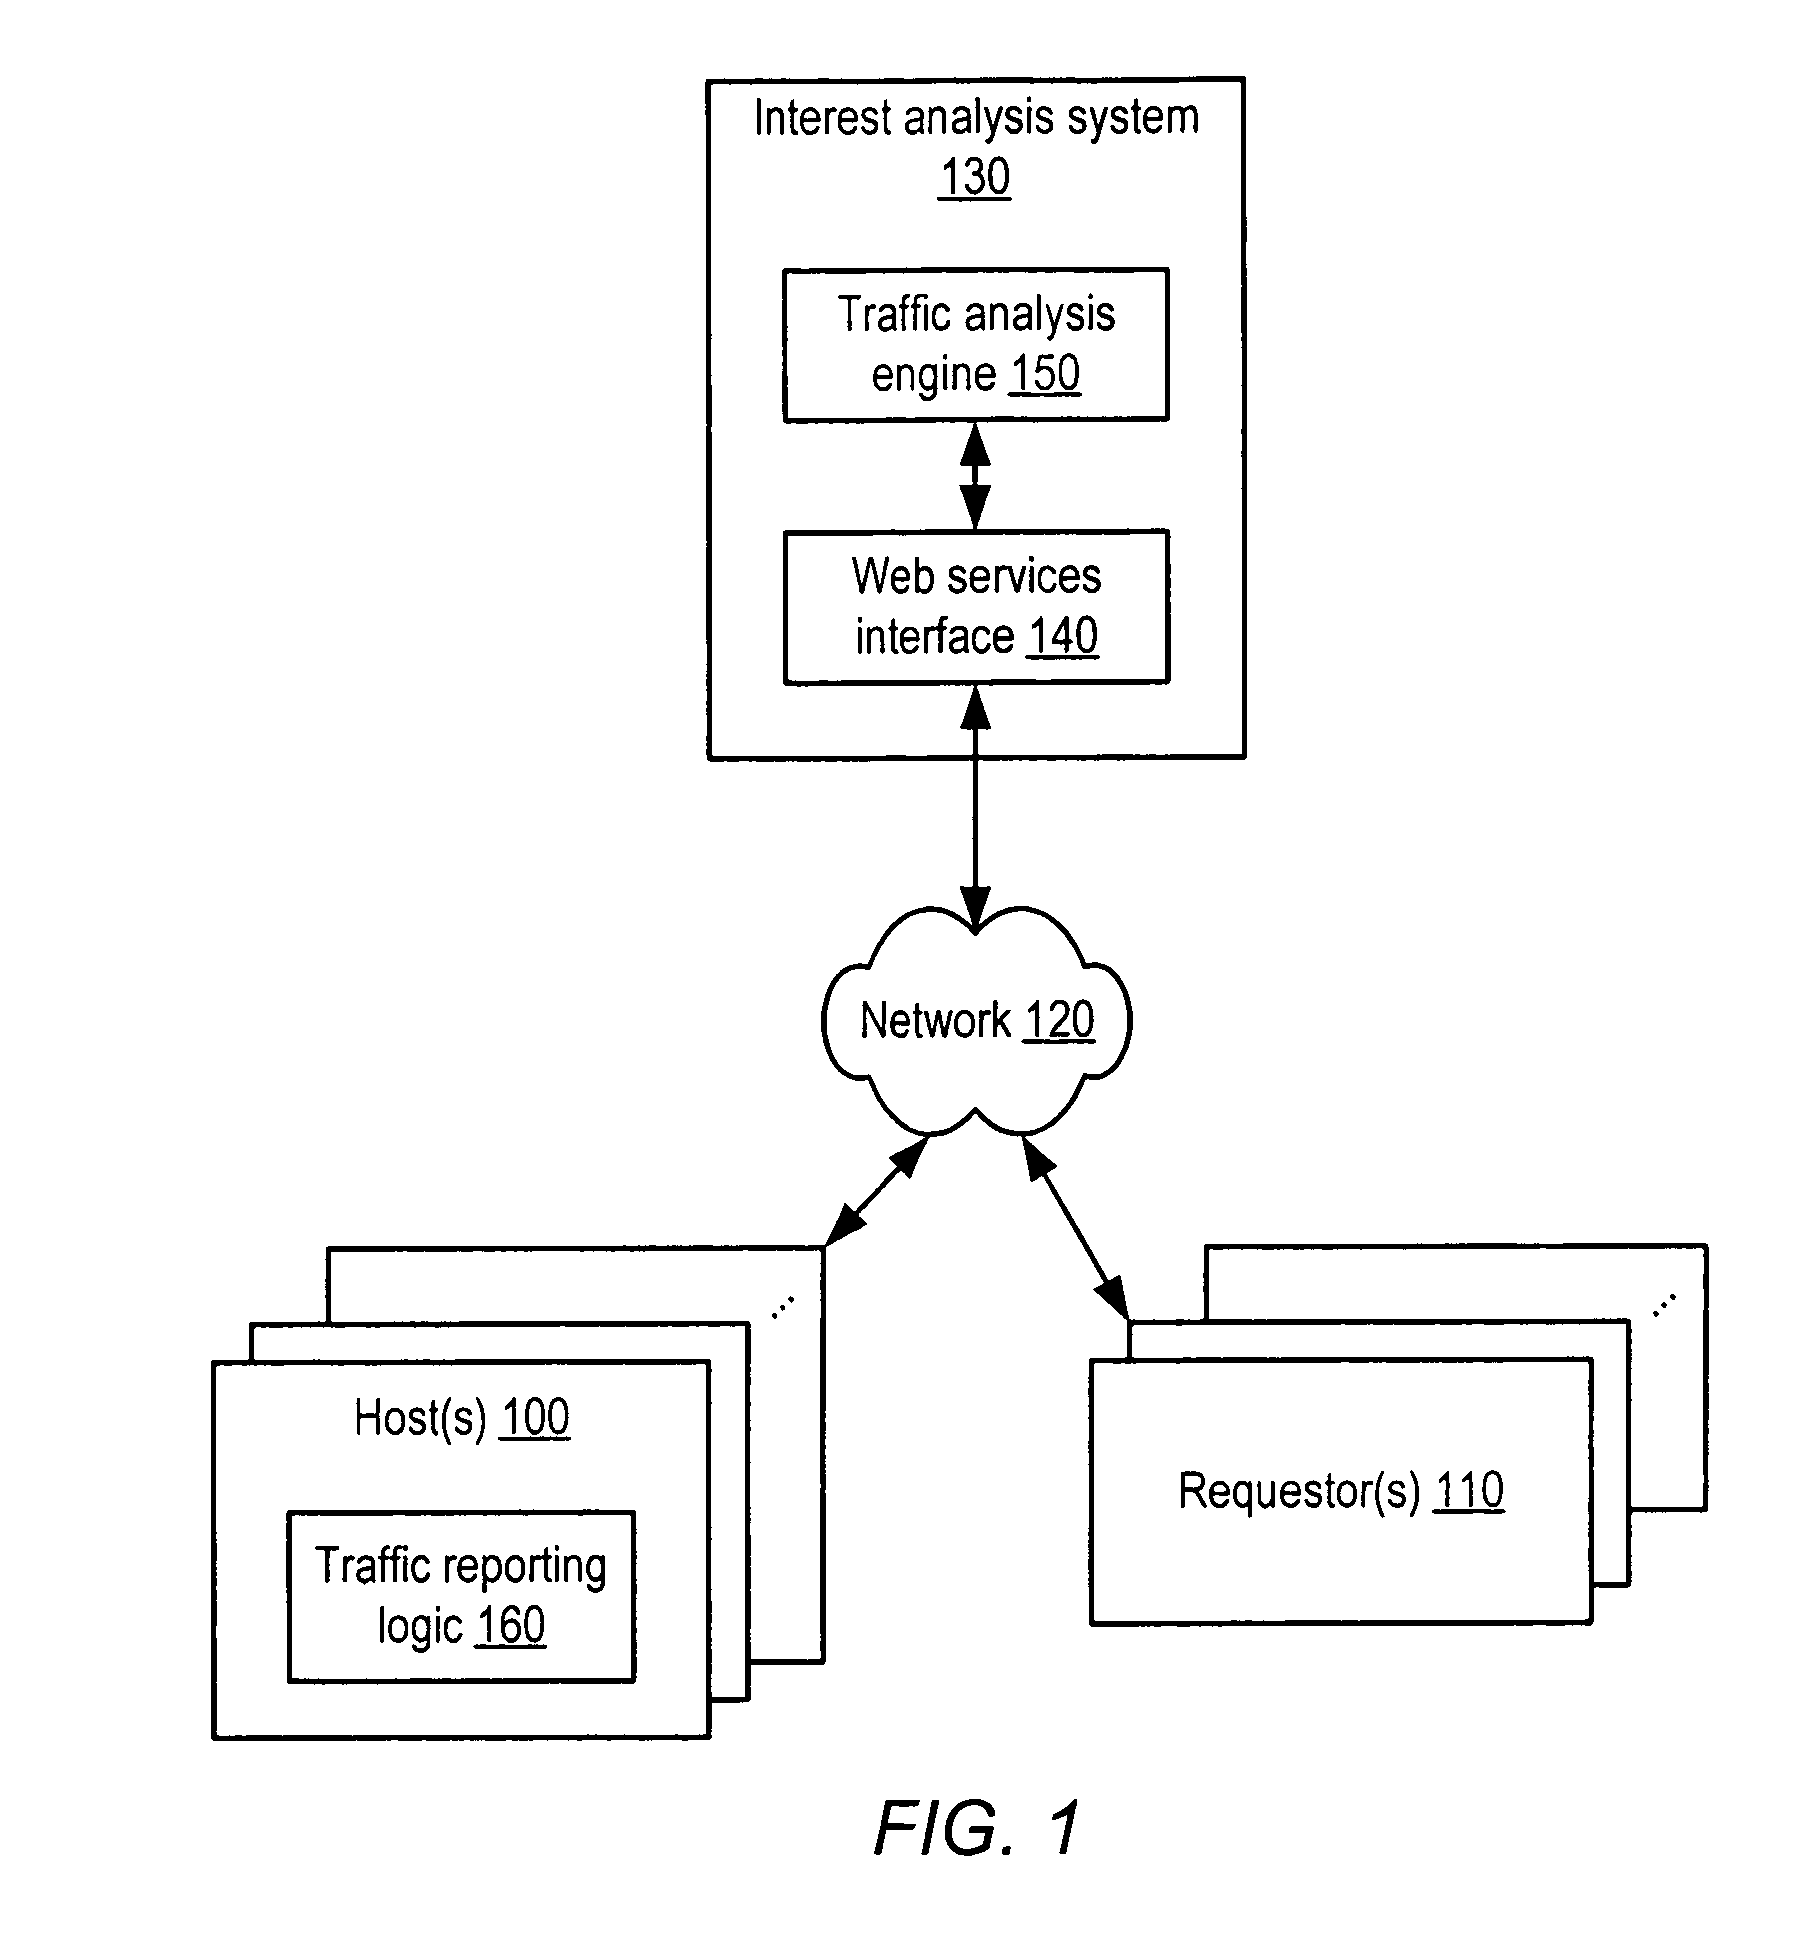 Method and system for determining interest levels of online content navigation paths